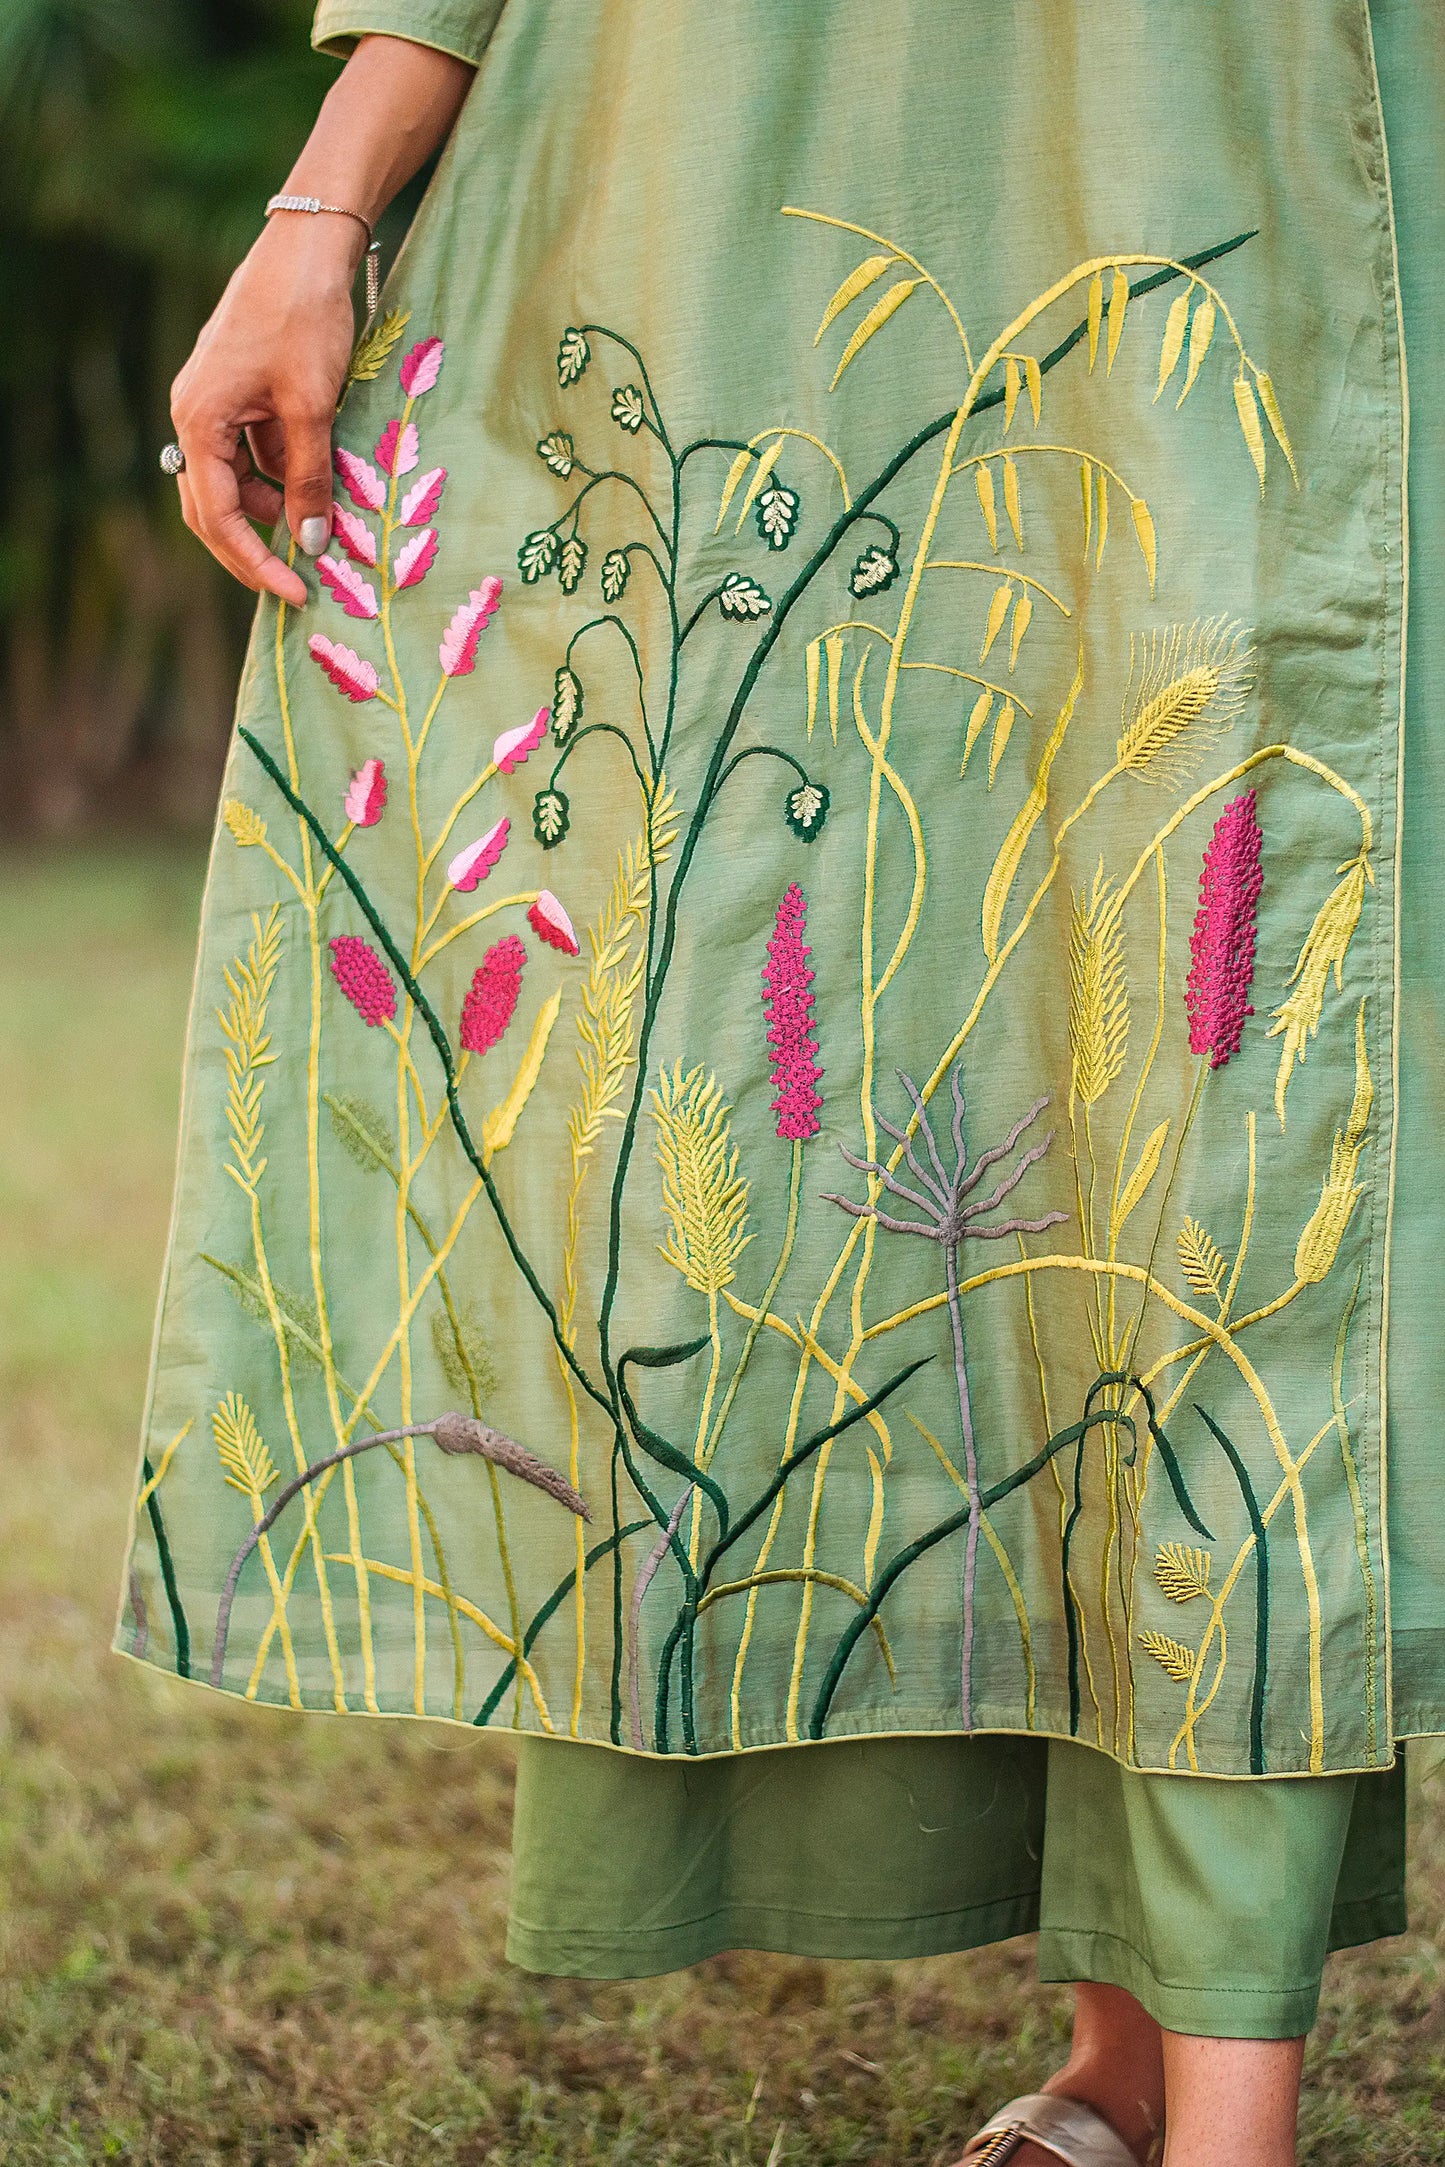 Detailed shot of the multicolour floral embroidery on the green kurta as styled by the model